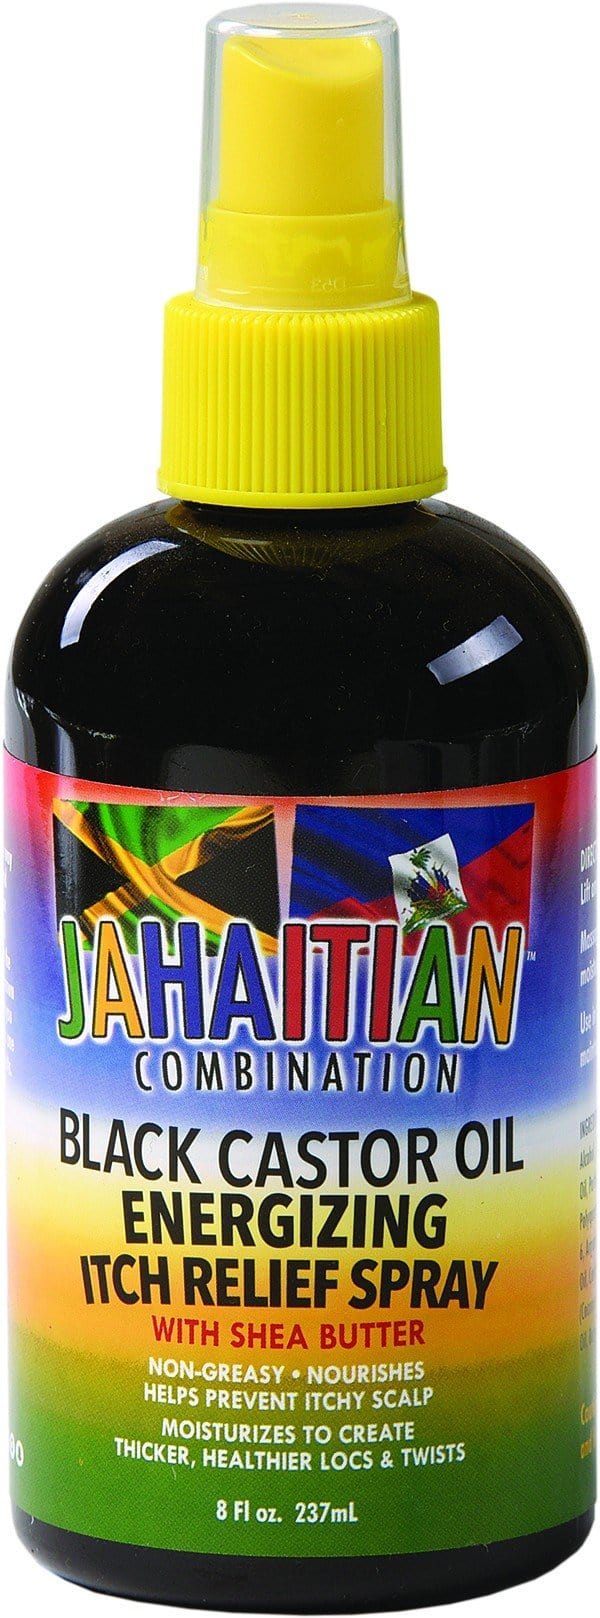 Jahaitian Black Castor Oil Energizing Itch Relief Spray 237 ml